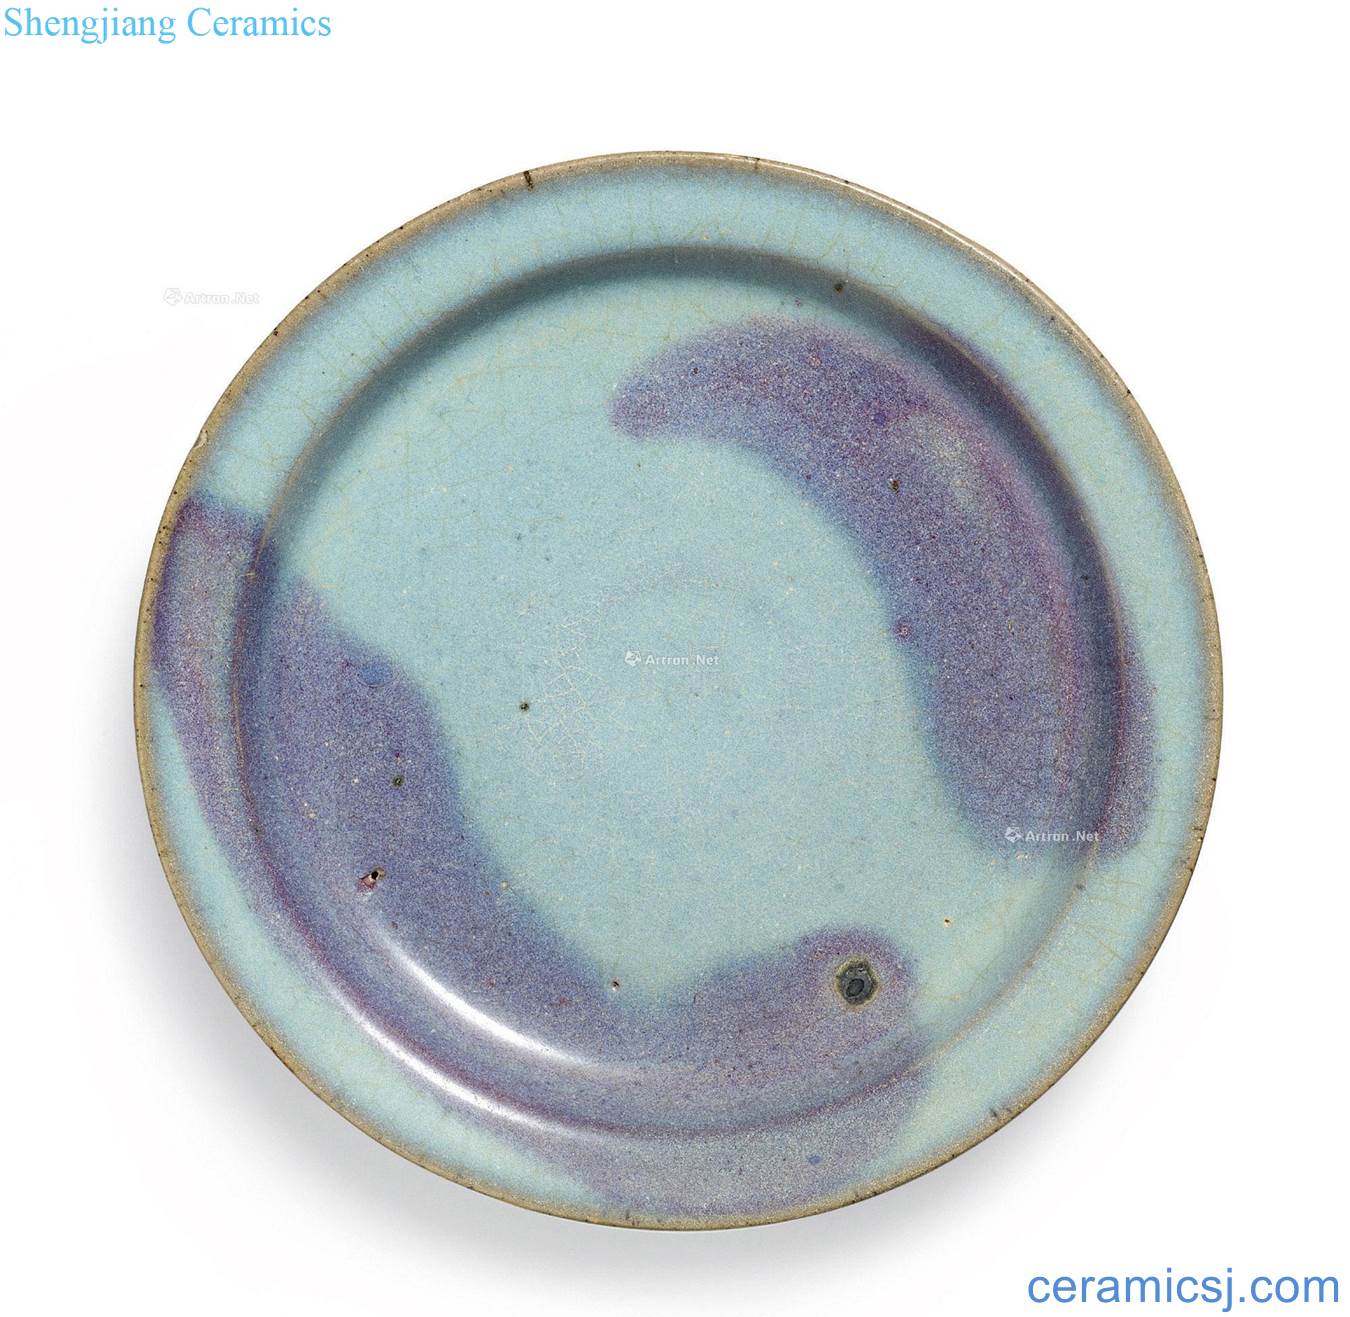 Northern song dynasty to gold Sky blue glaze masterpieces purple ruffled along the plate